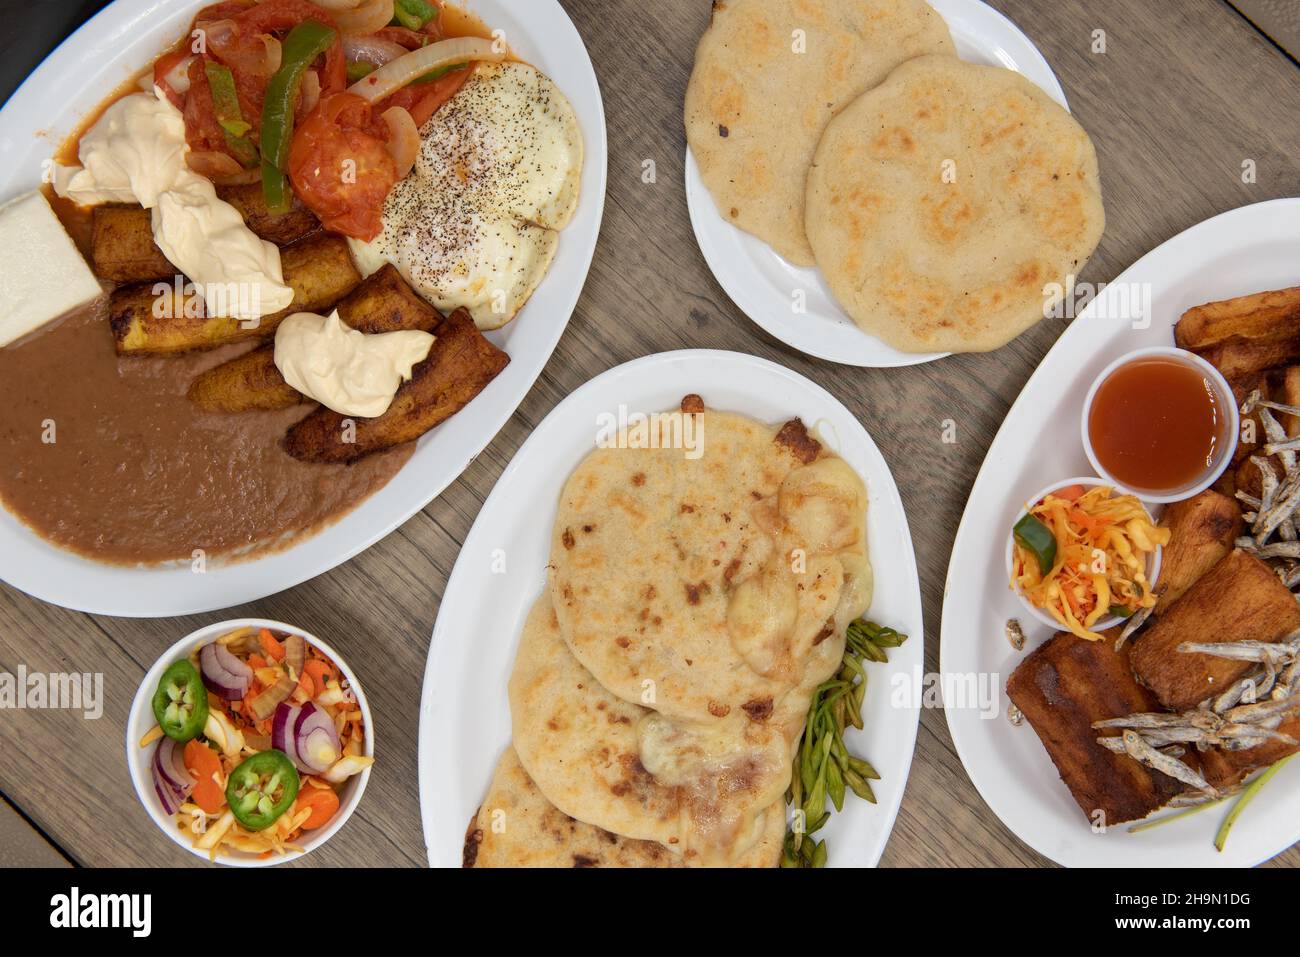 Overhead view of Latino flavored table of prepared El Salvadoran food with meat, fried plantains, pupusa, yucca, and refried beans. Stock Photo